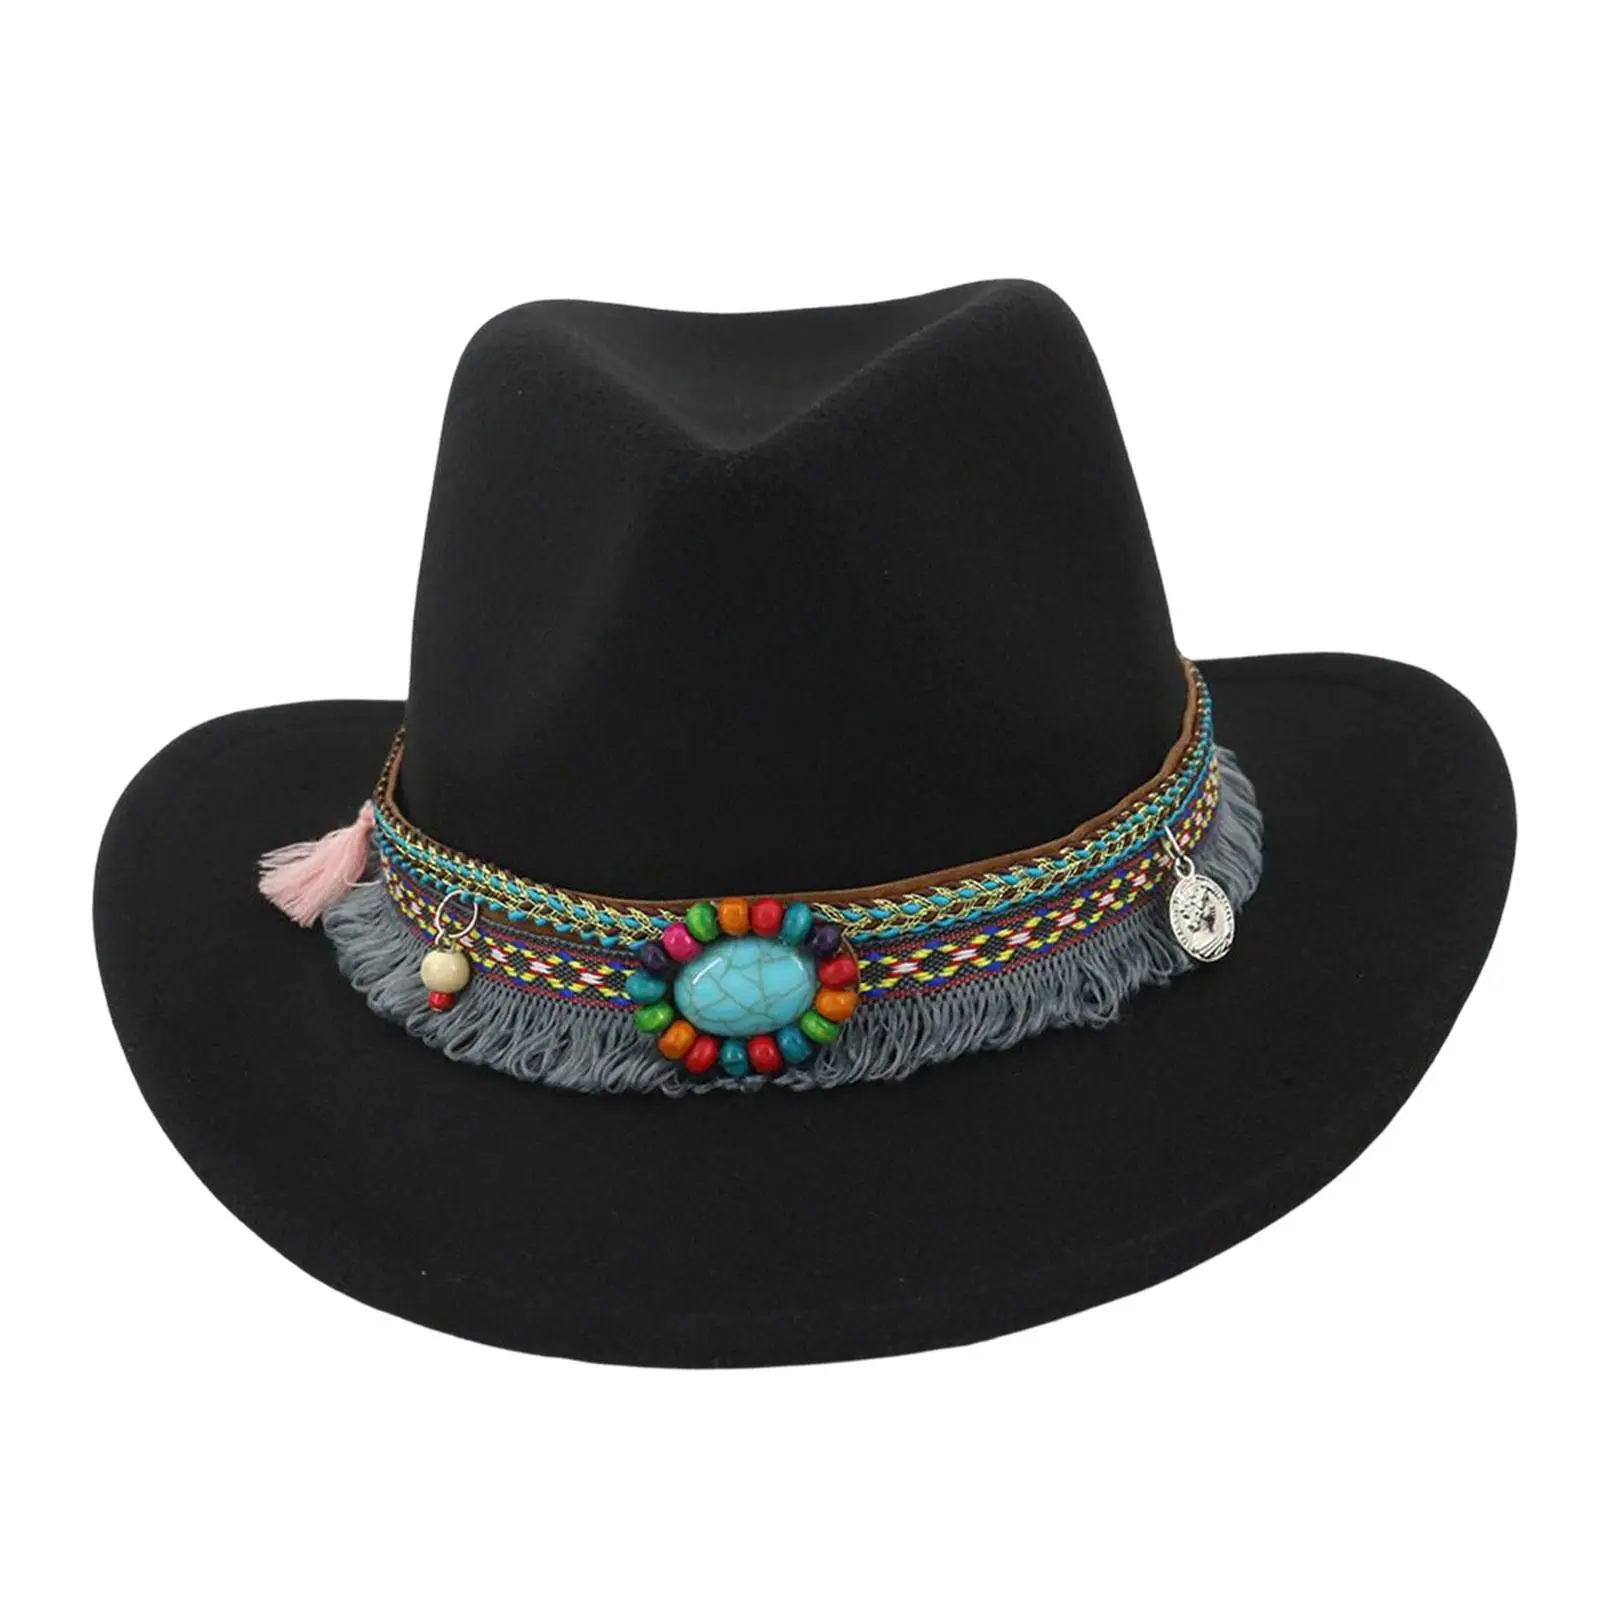 Classic Unisex Adult Western Cowboy Hat Fedoras Caps Panama Hat for Party